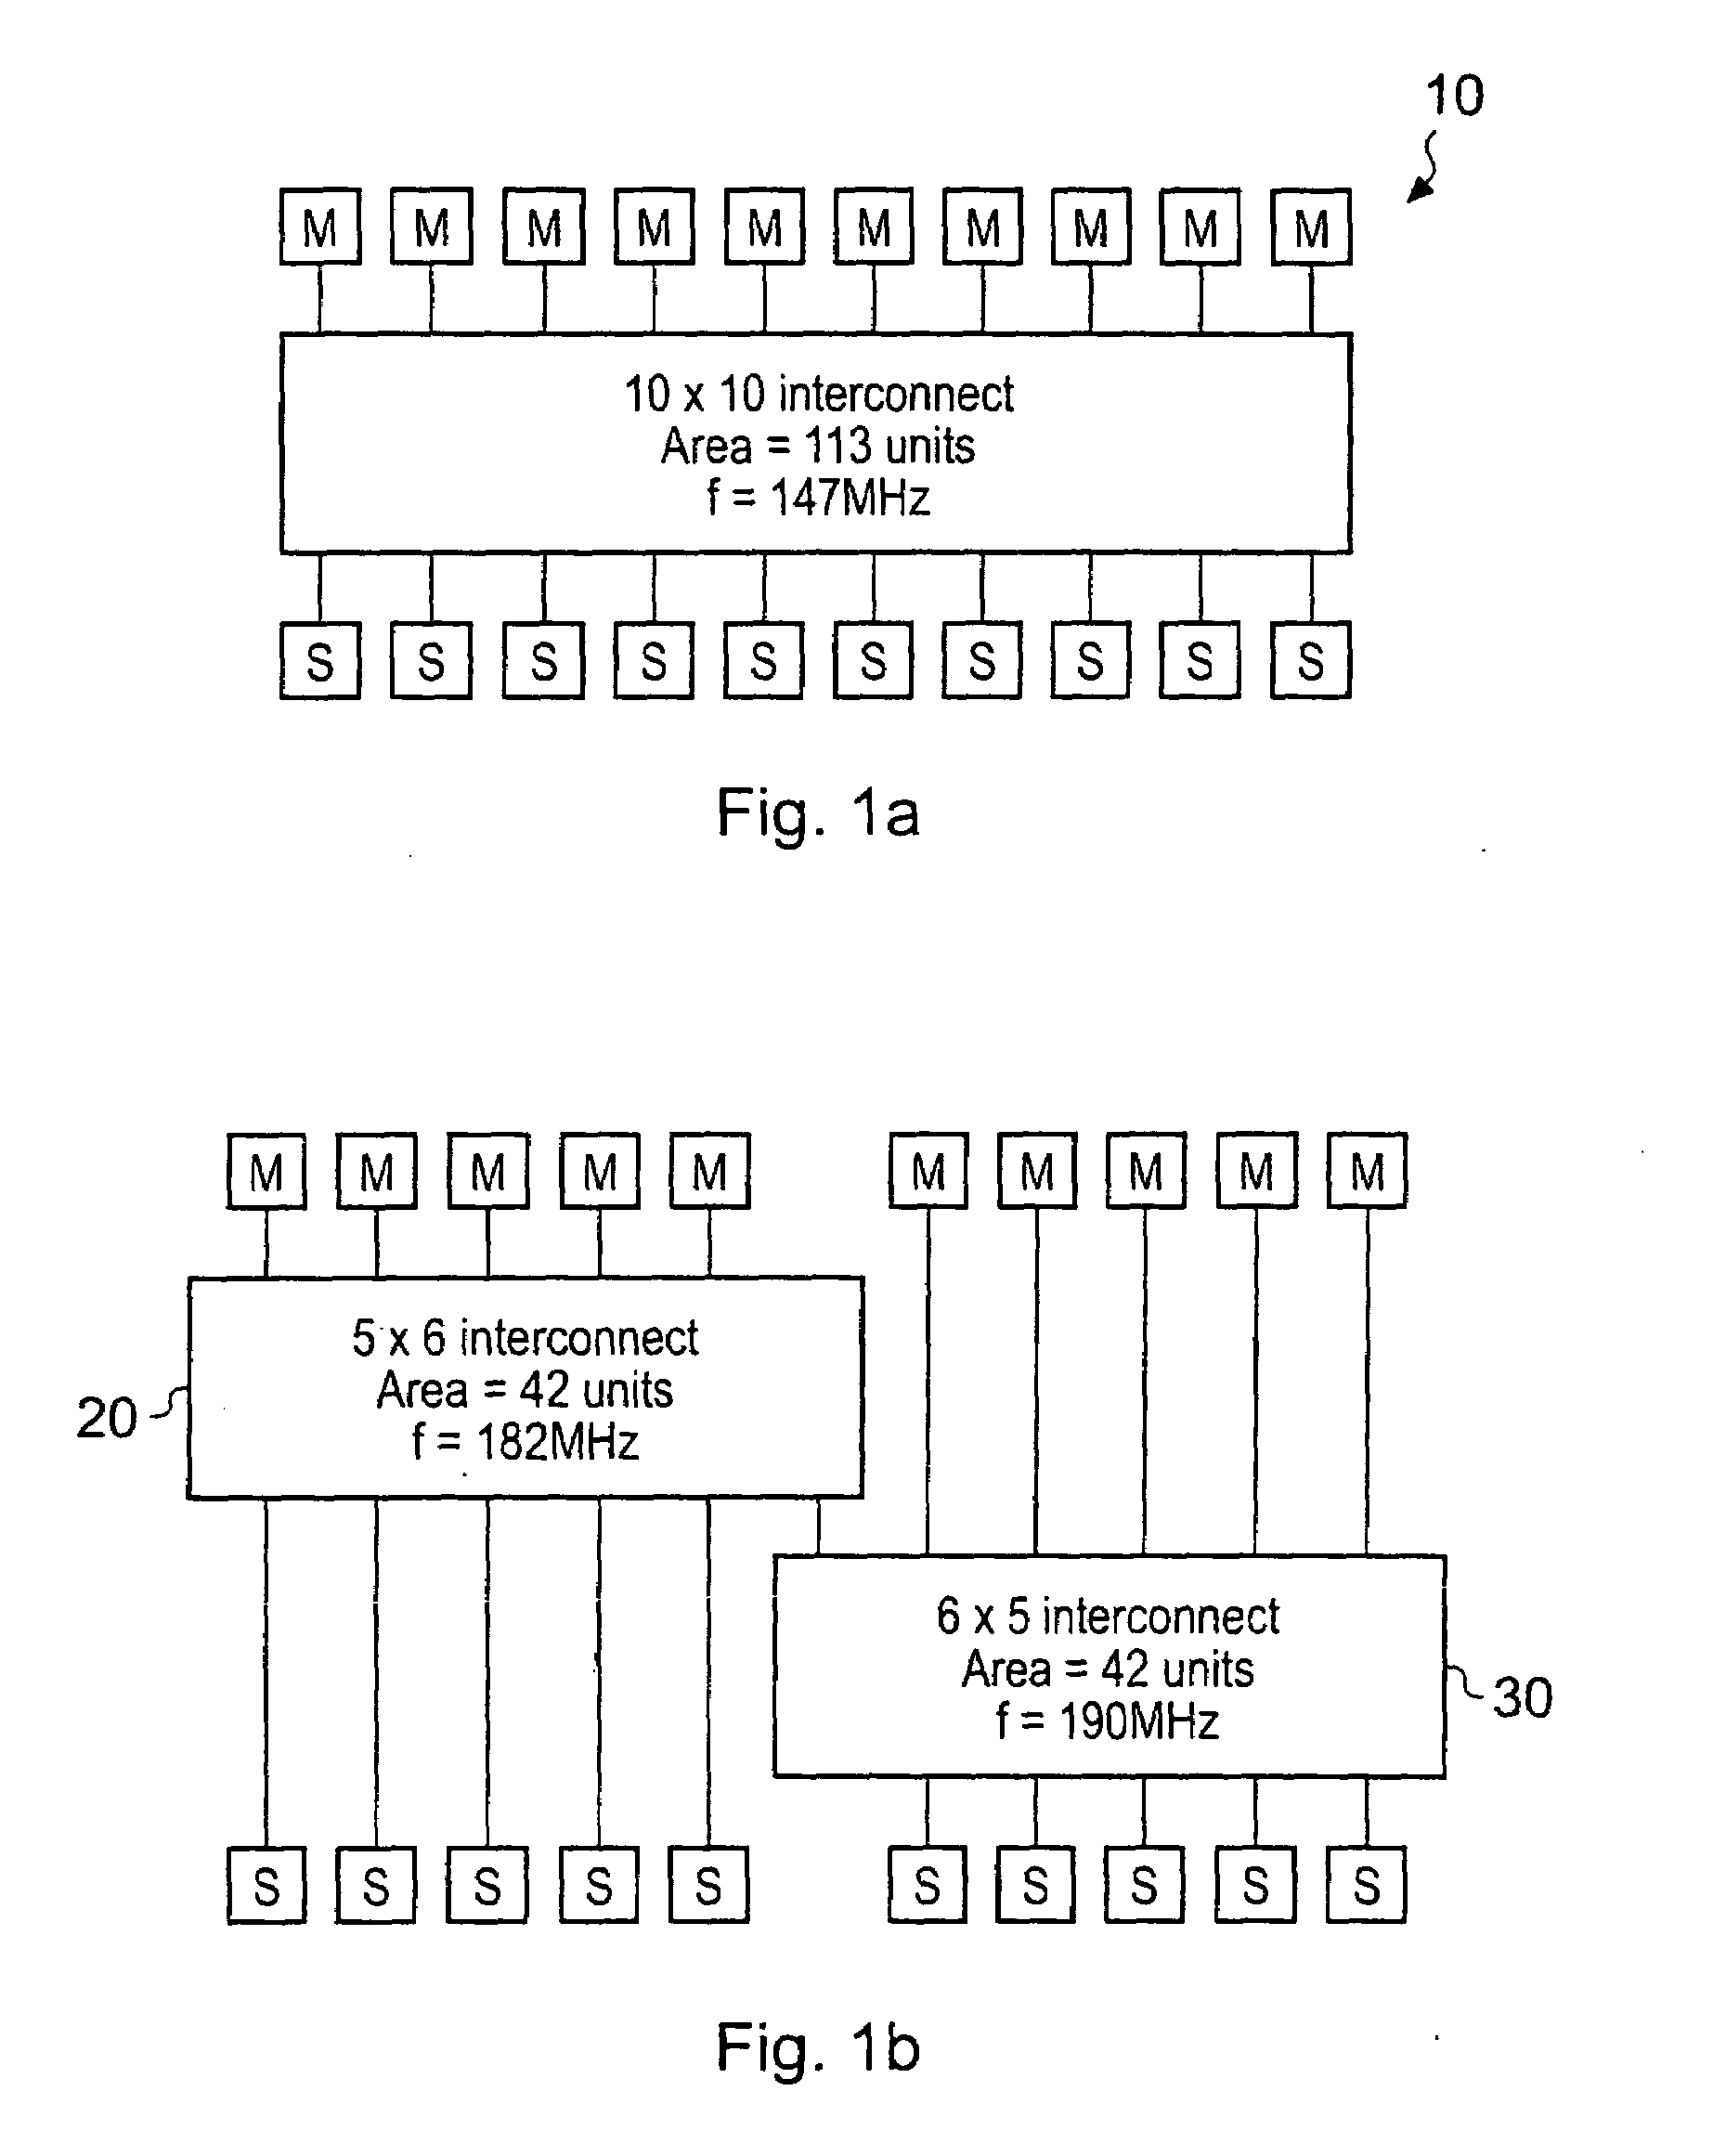 Interconnecting initiator devices and recipient devices